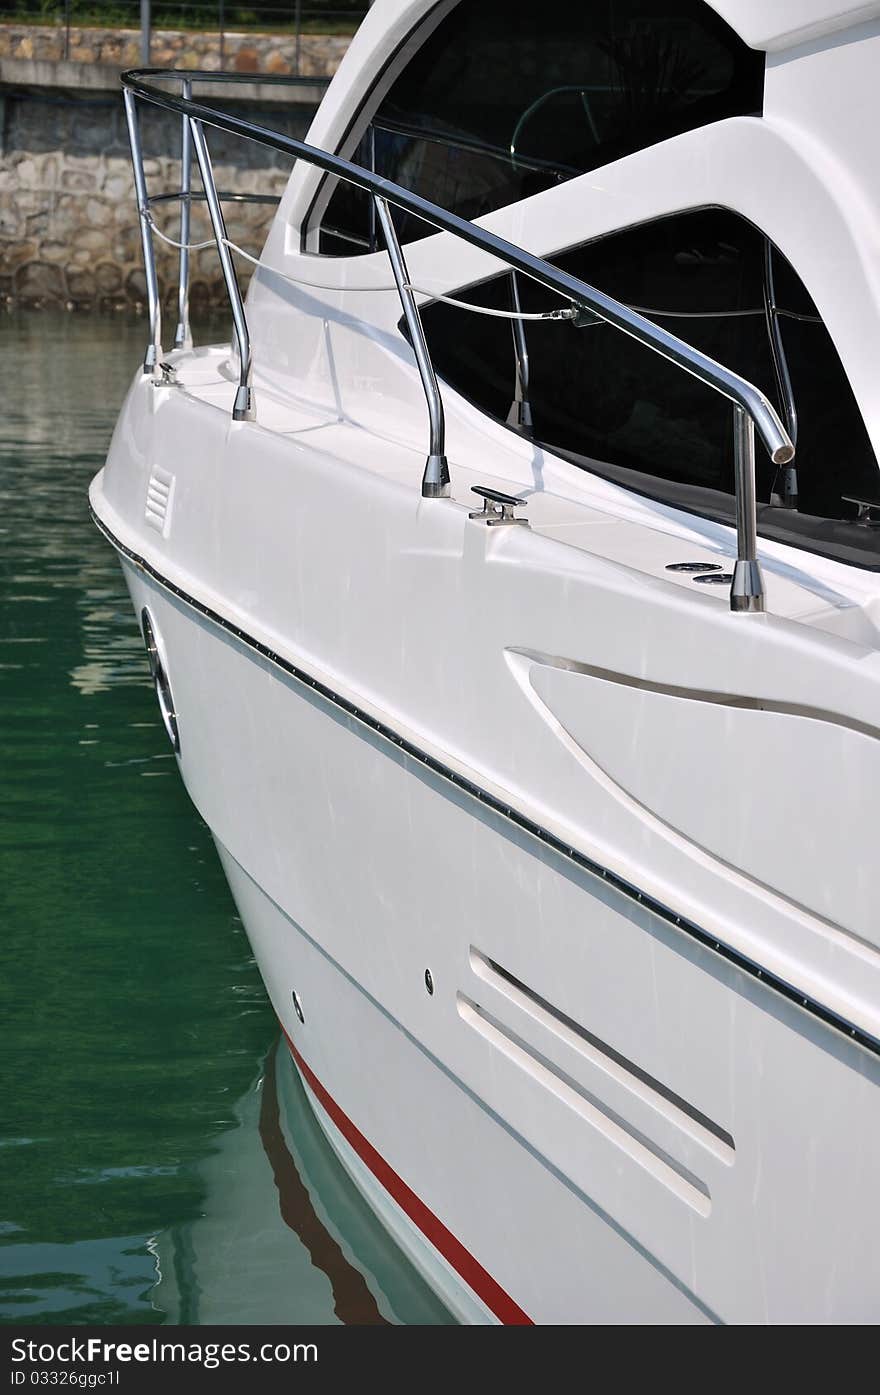 Body of a white yacht which stop in harbor, shown as marine activity, travel or in maintenance. Body of a white yacht which stop in harbor, shown as marine activity, travel or in maintenance.